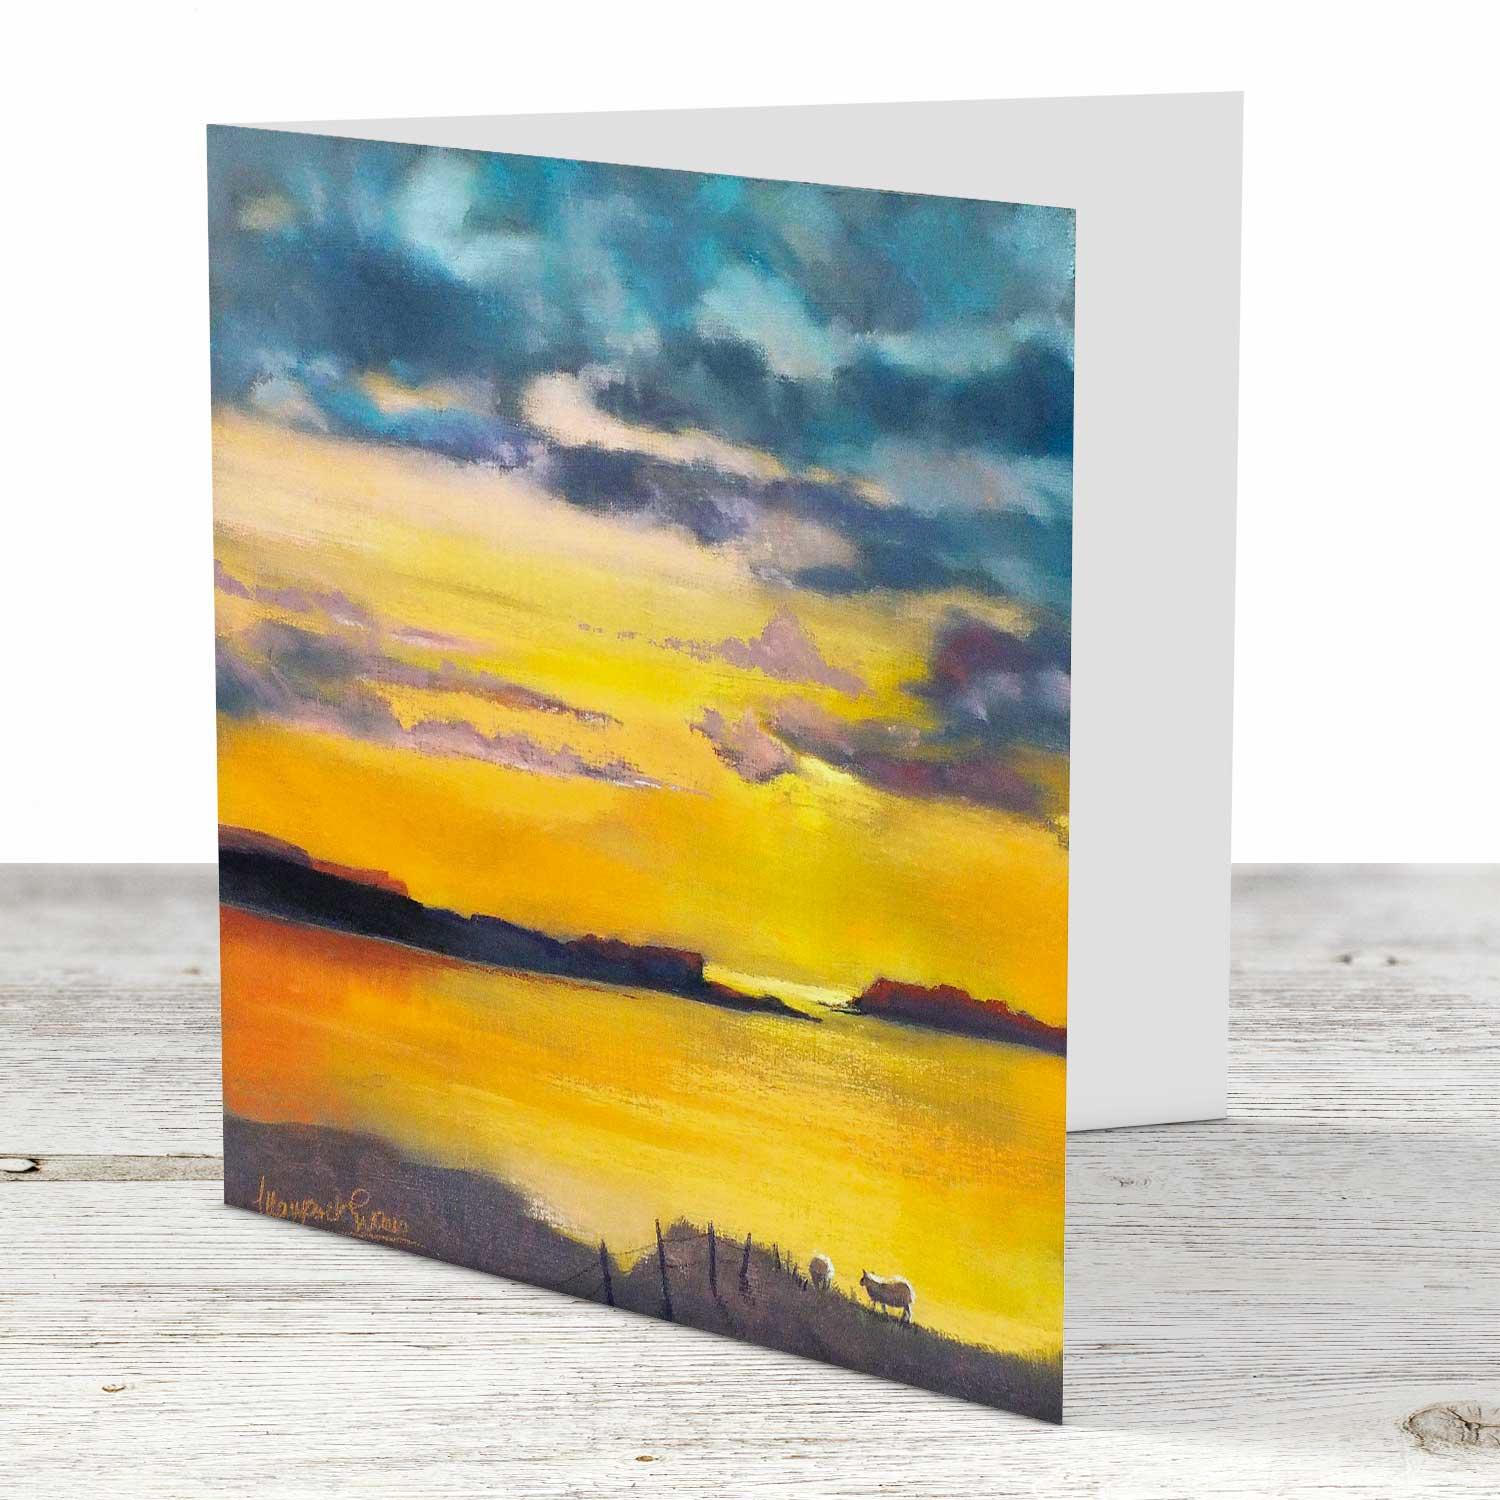 Home before Sunset Greeting Card from an original painting by artist Margaret Evans